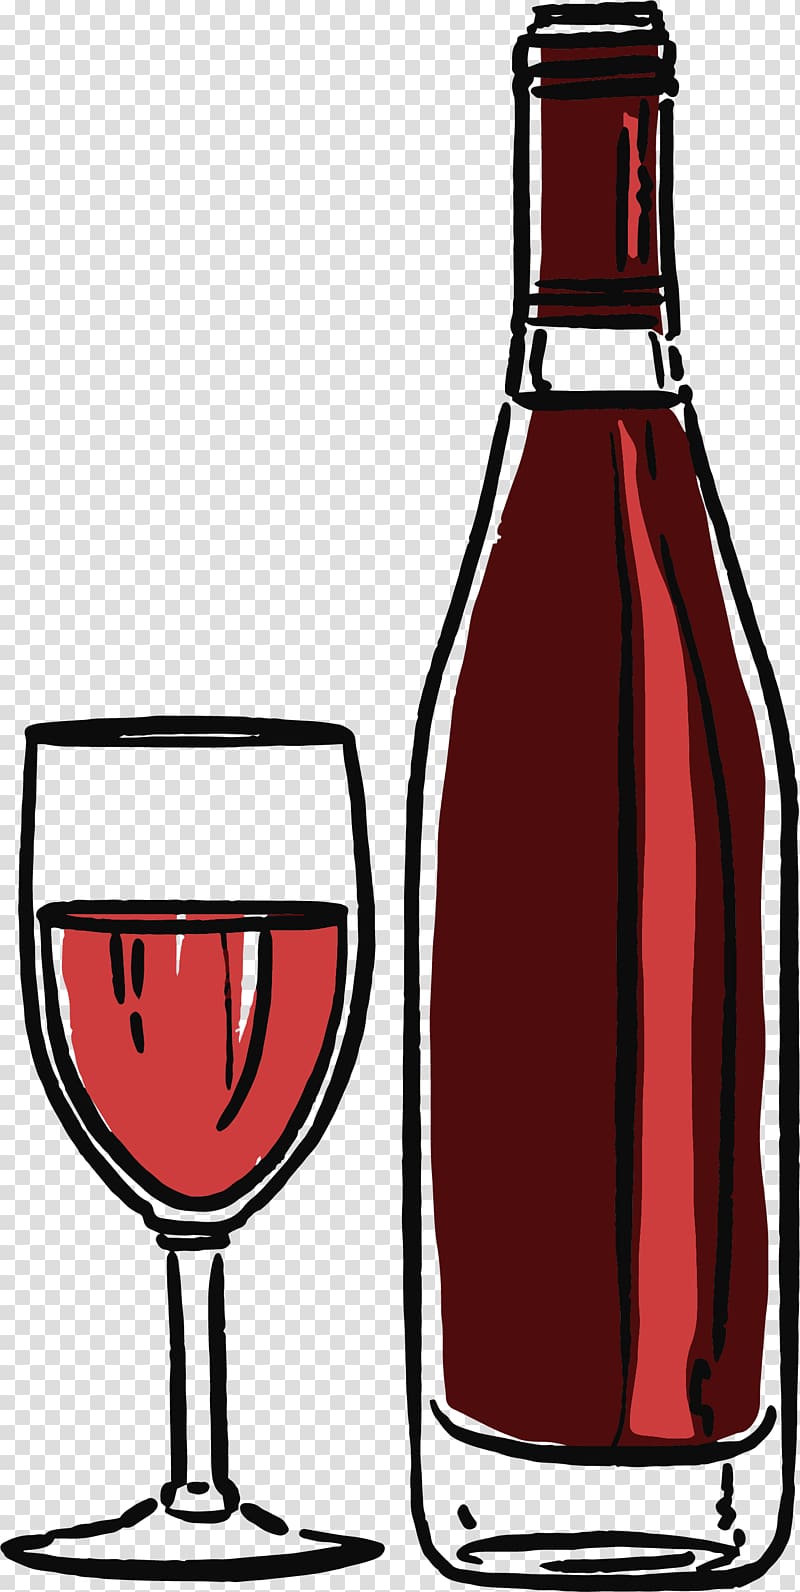 Red Wine Wine glass Alcoholic drink Dessert wine, do not drink alcohol transparent background PNG clipart